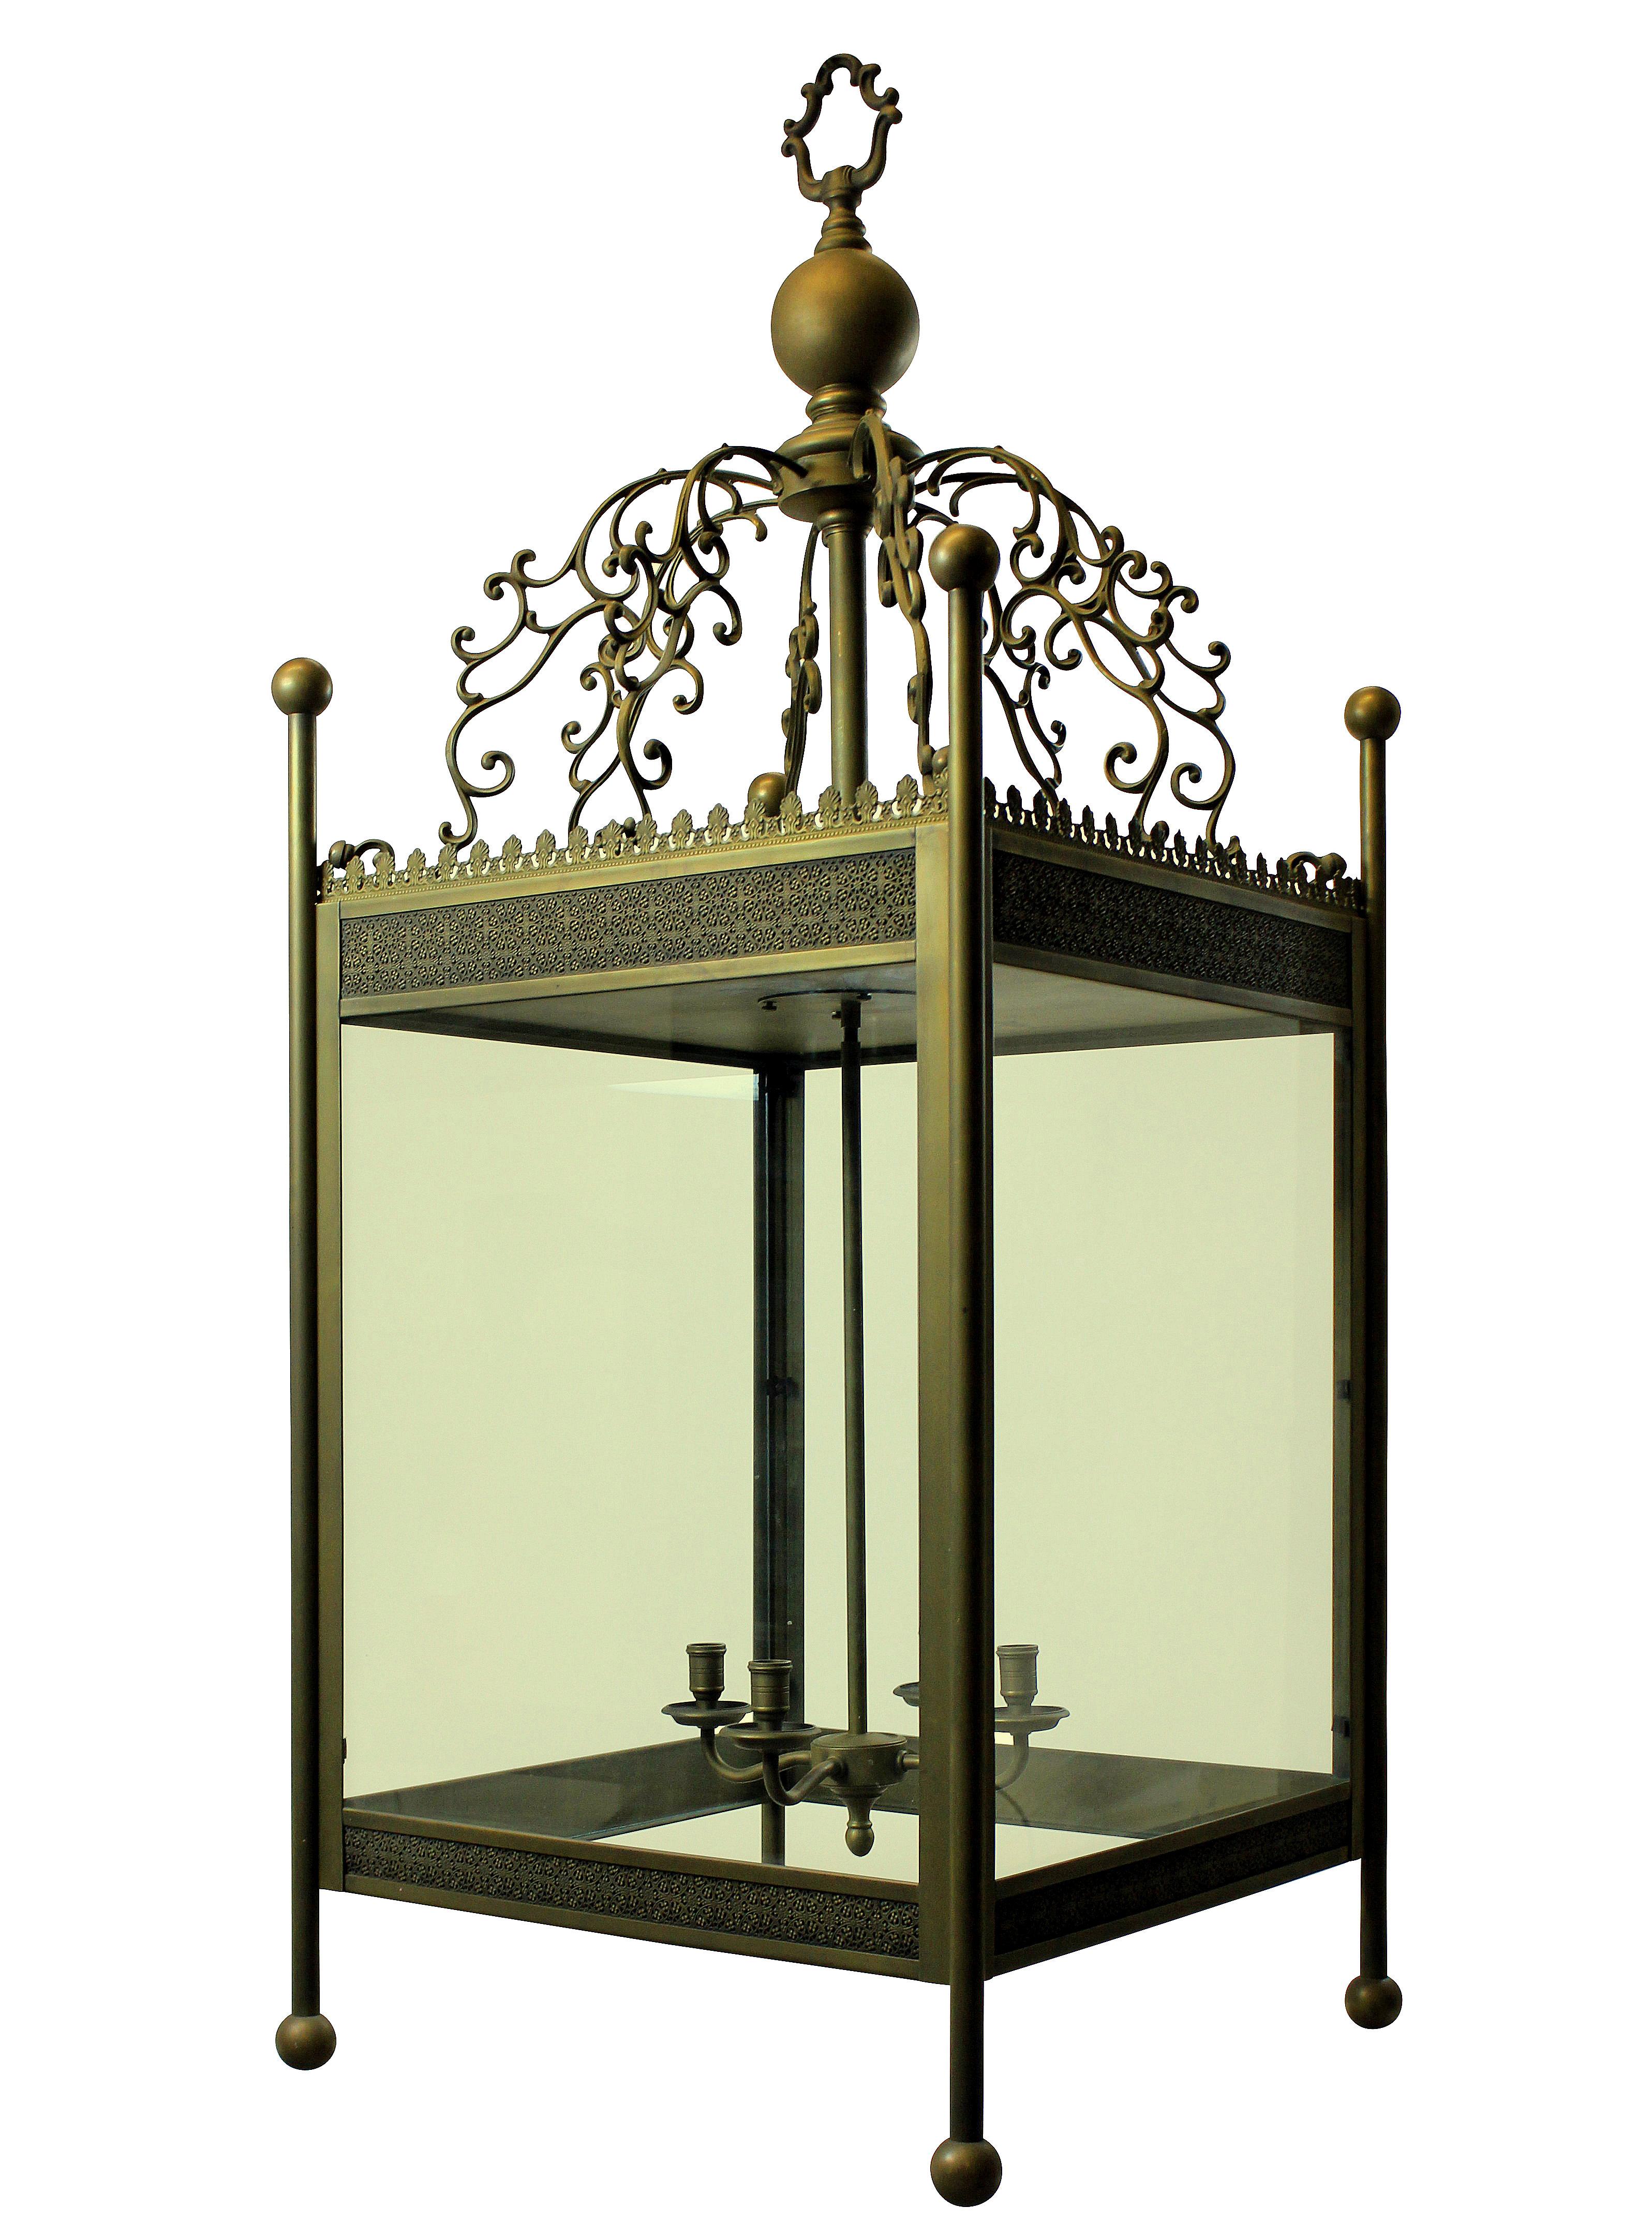 A pair of large brass lanterns designed for the St Pancras Hotel, formerly Sir Gilbert Scott's midland grand. This pair of lanterns were the only two not used in the project and are unique examples of a Gothic or Moorish design with provenance.